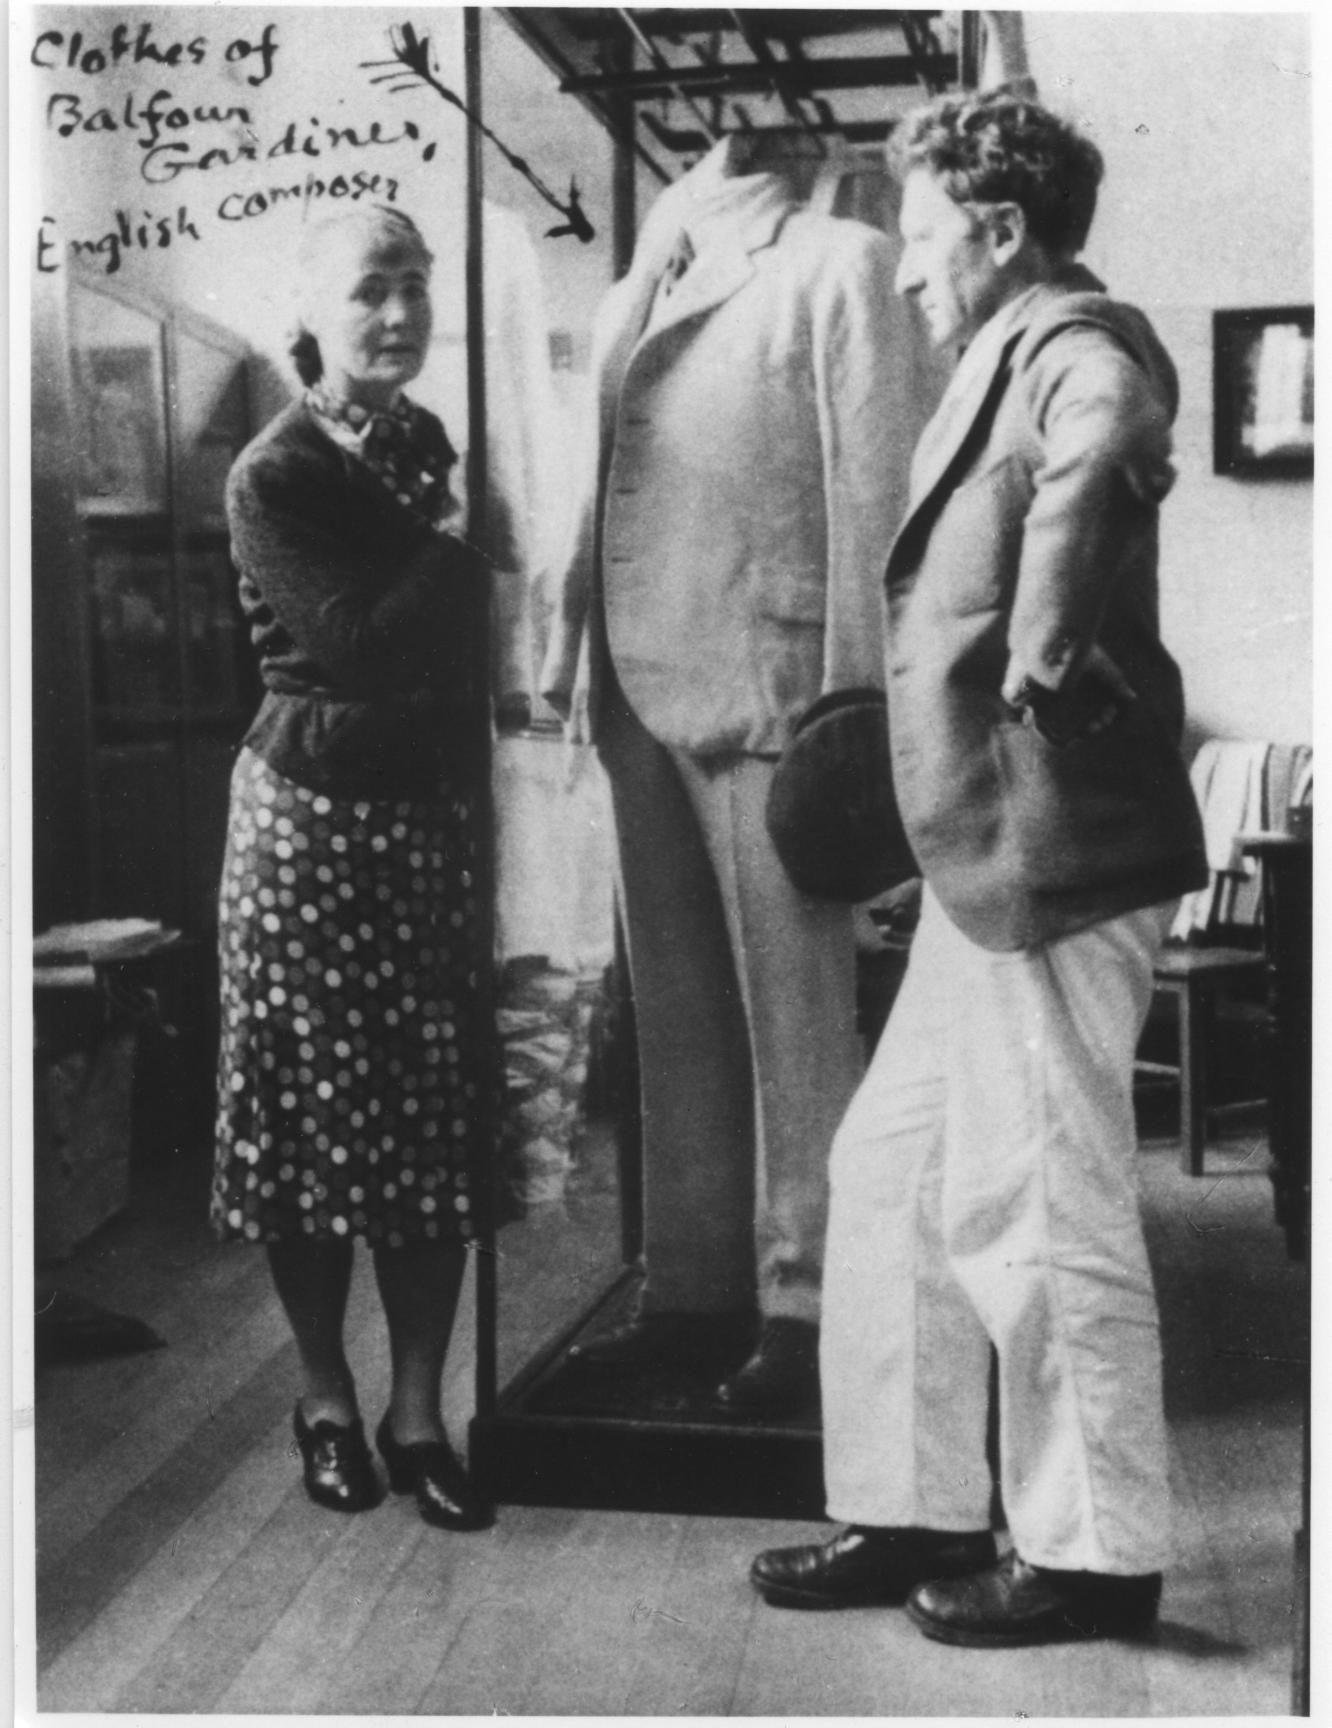 Percy and Ella Grainger with a display of the clothes of English composer Balfour Gardiner, 1938